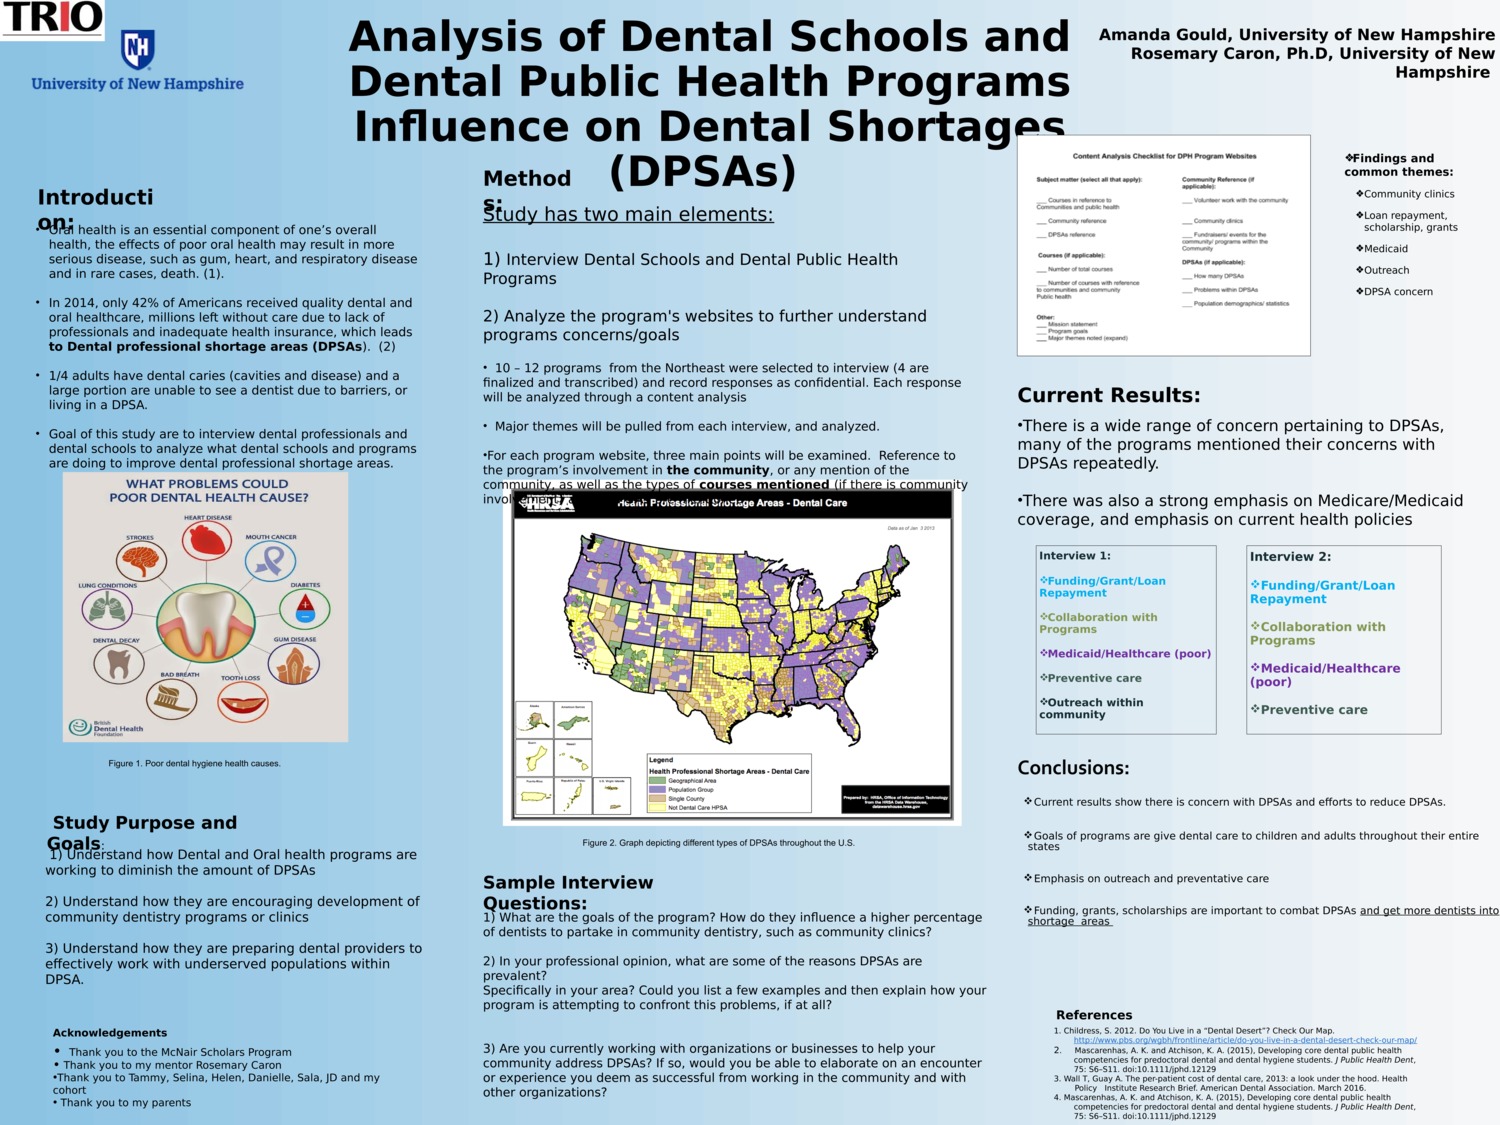 Analysis Of Dental Schools And Dental Public Health Programs Influence On Dental Shortage Areas (Dpsas) by aag2003